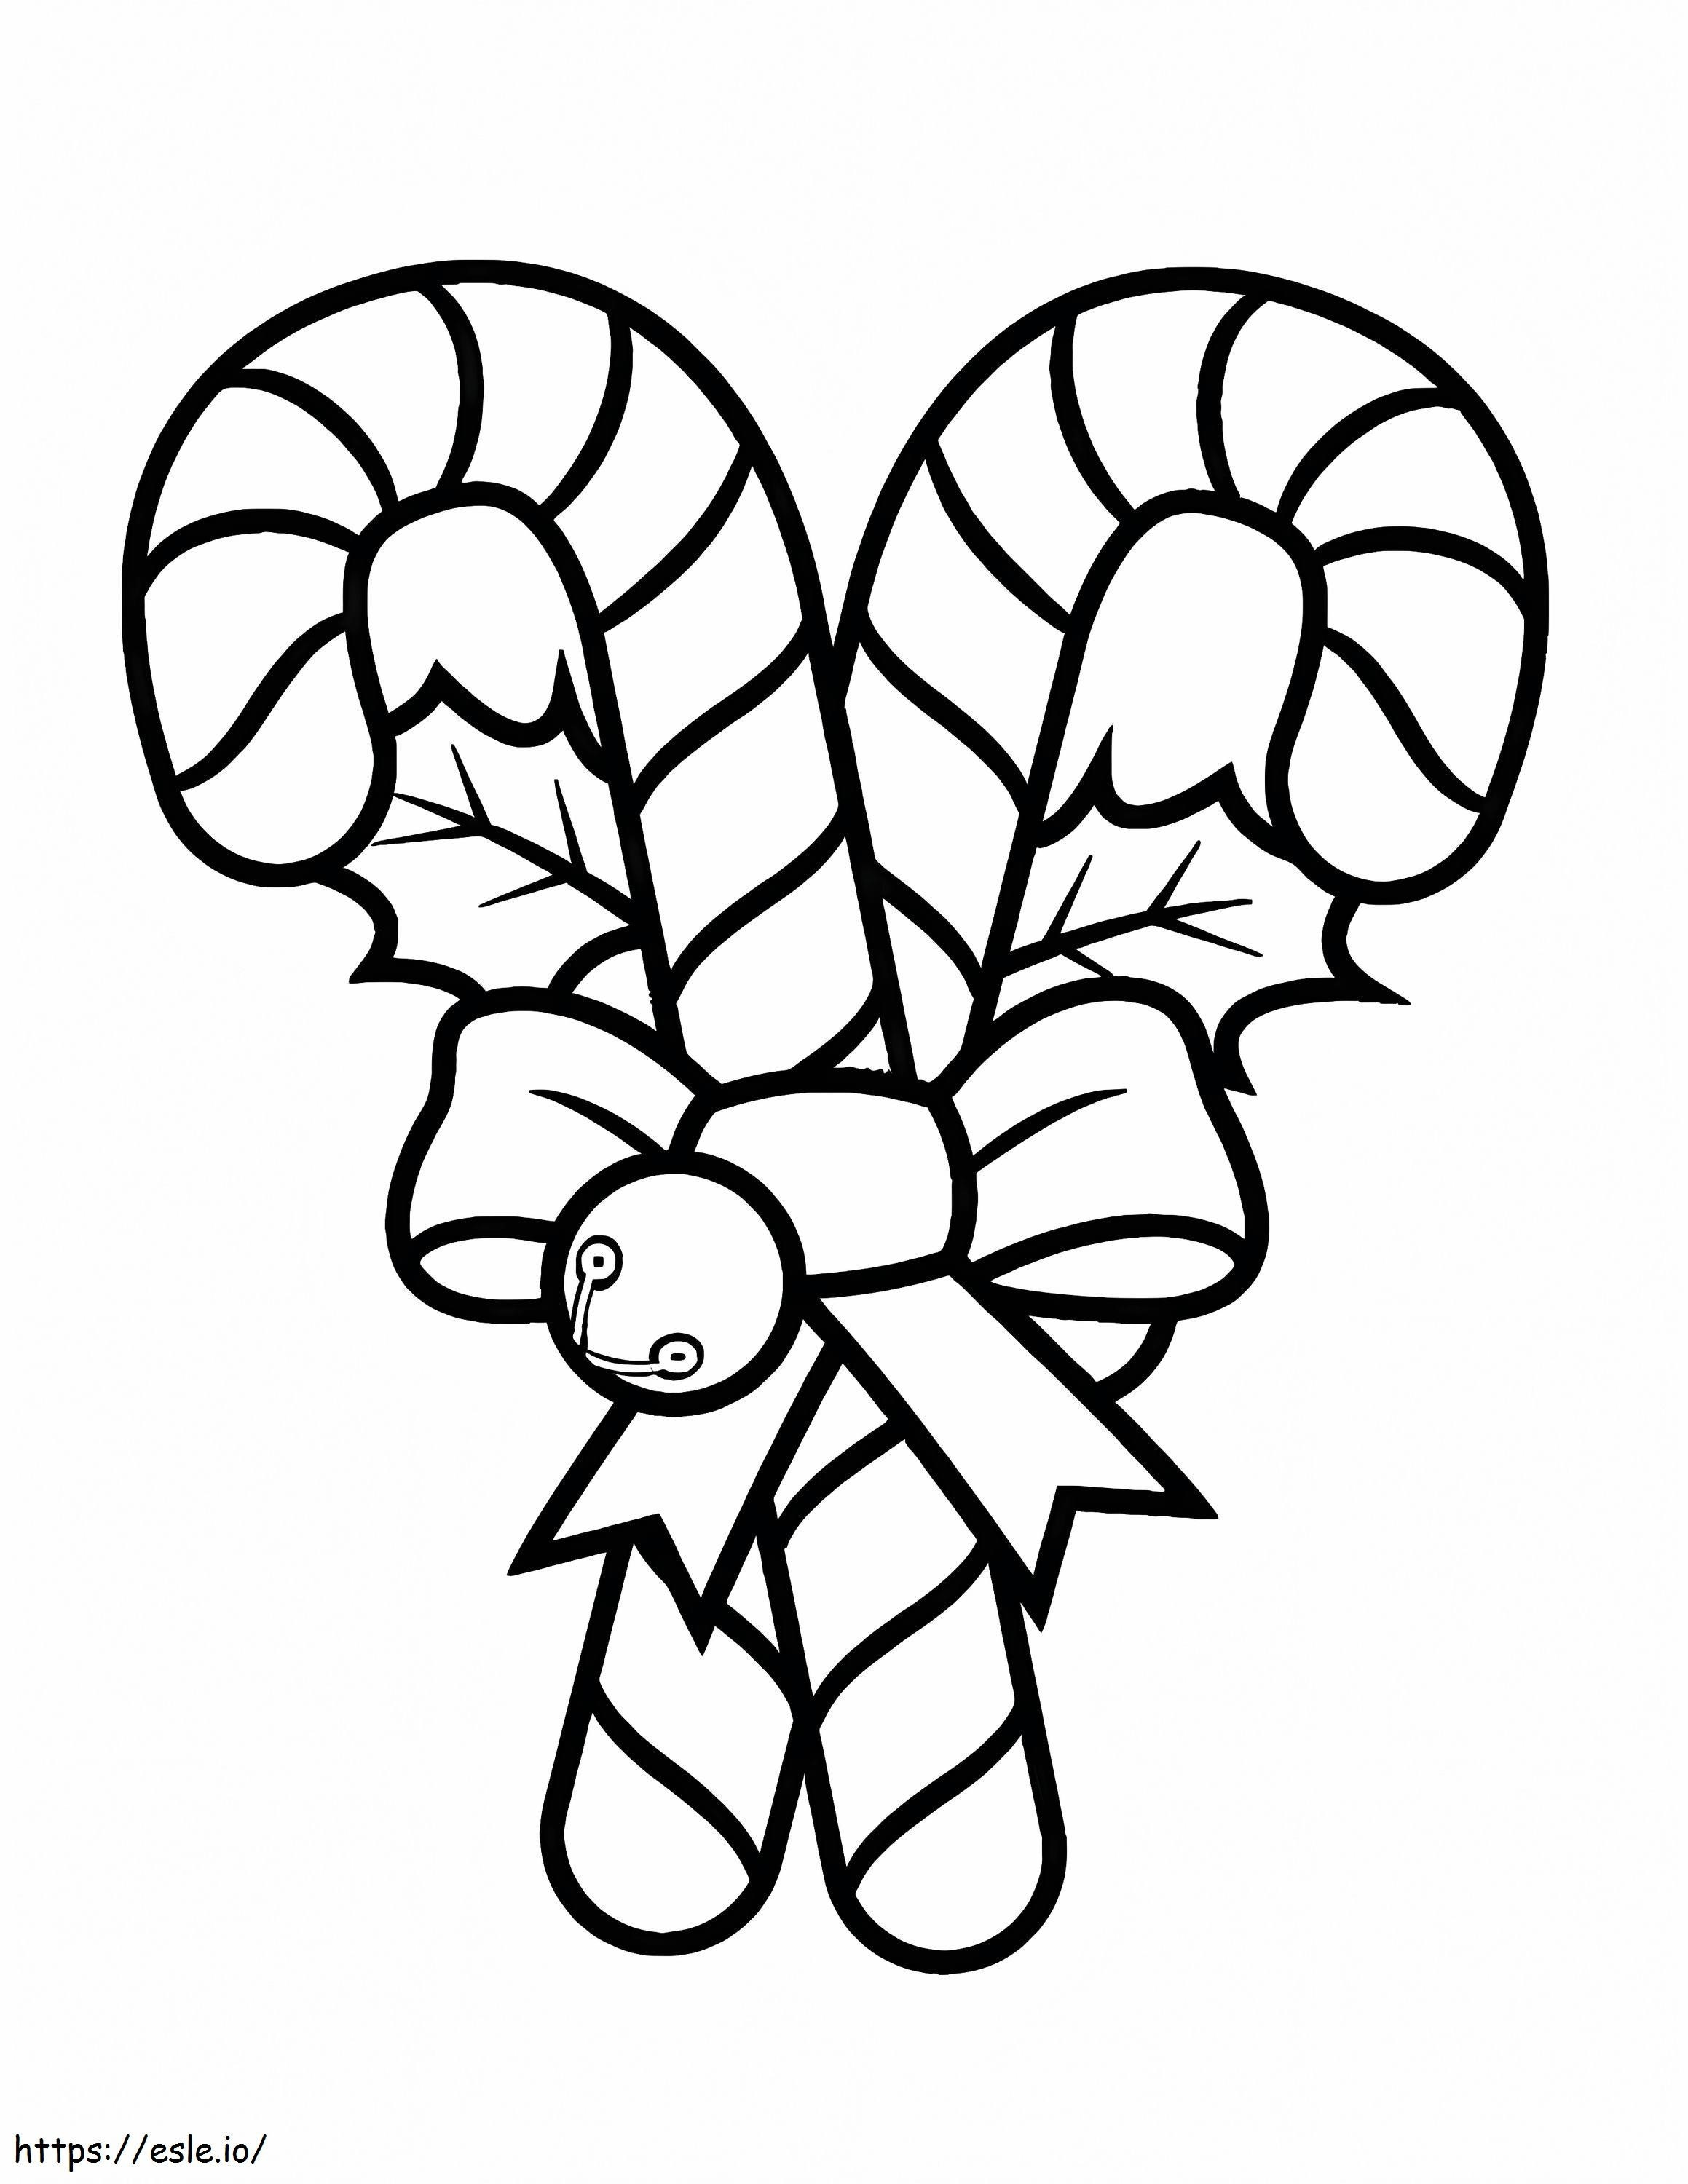 Two Candy Canes coloring page